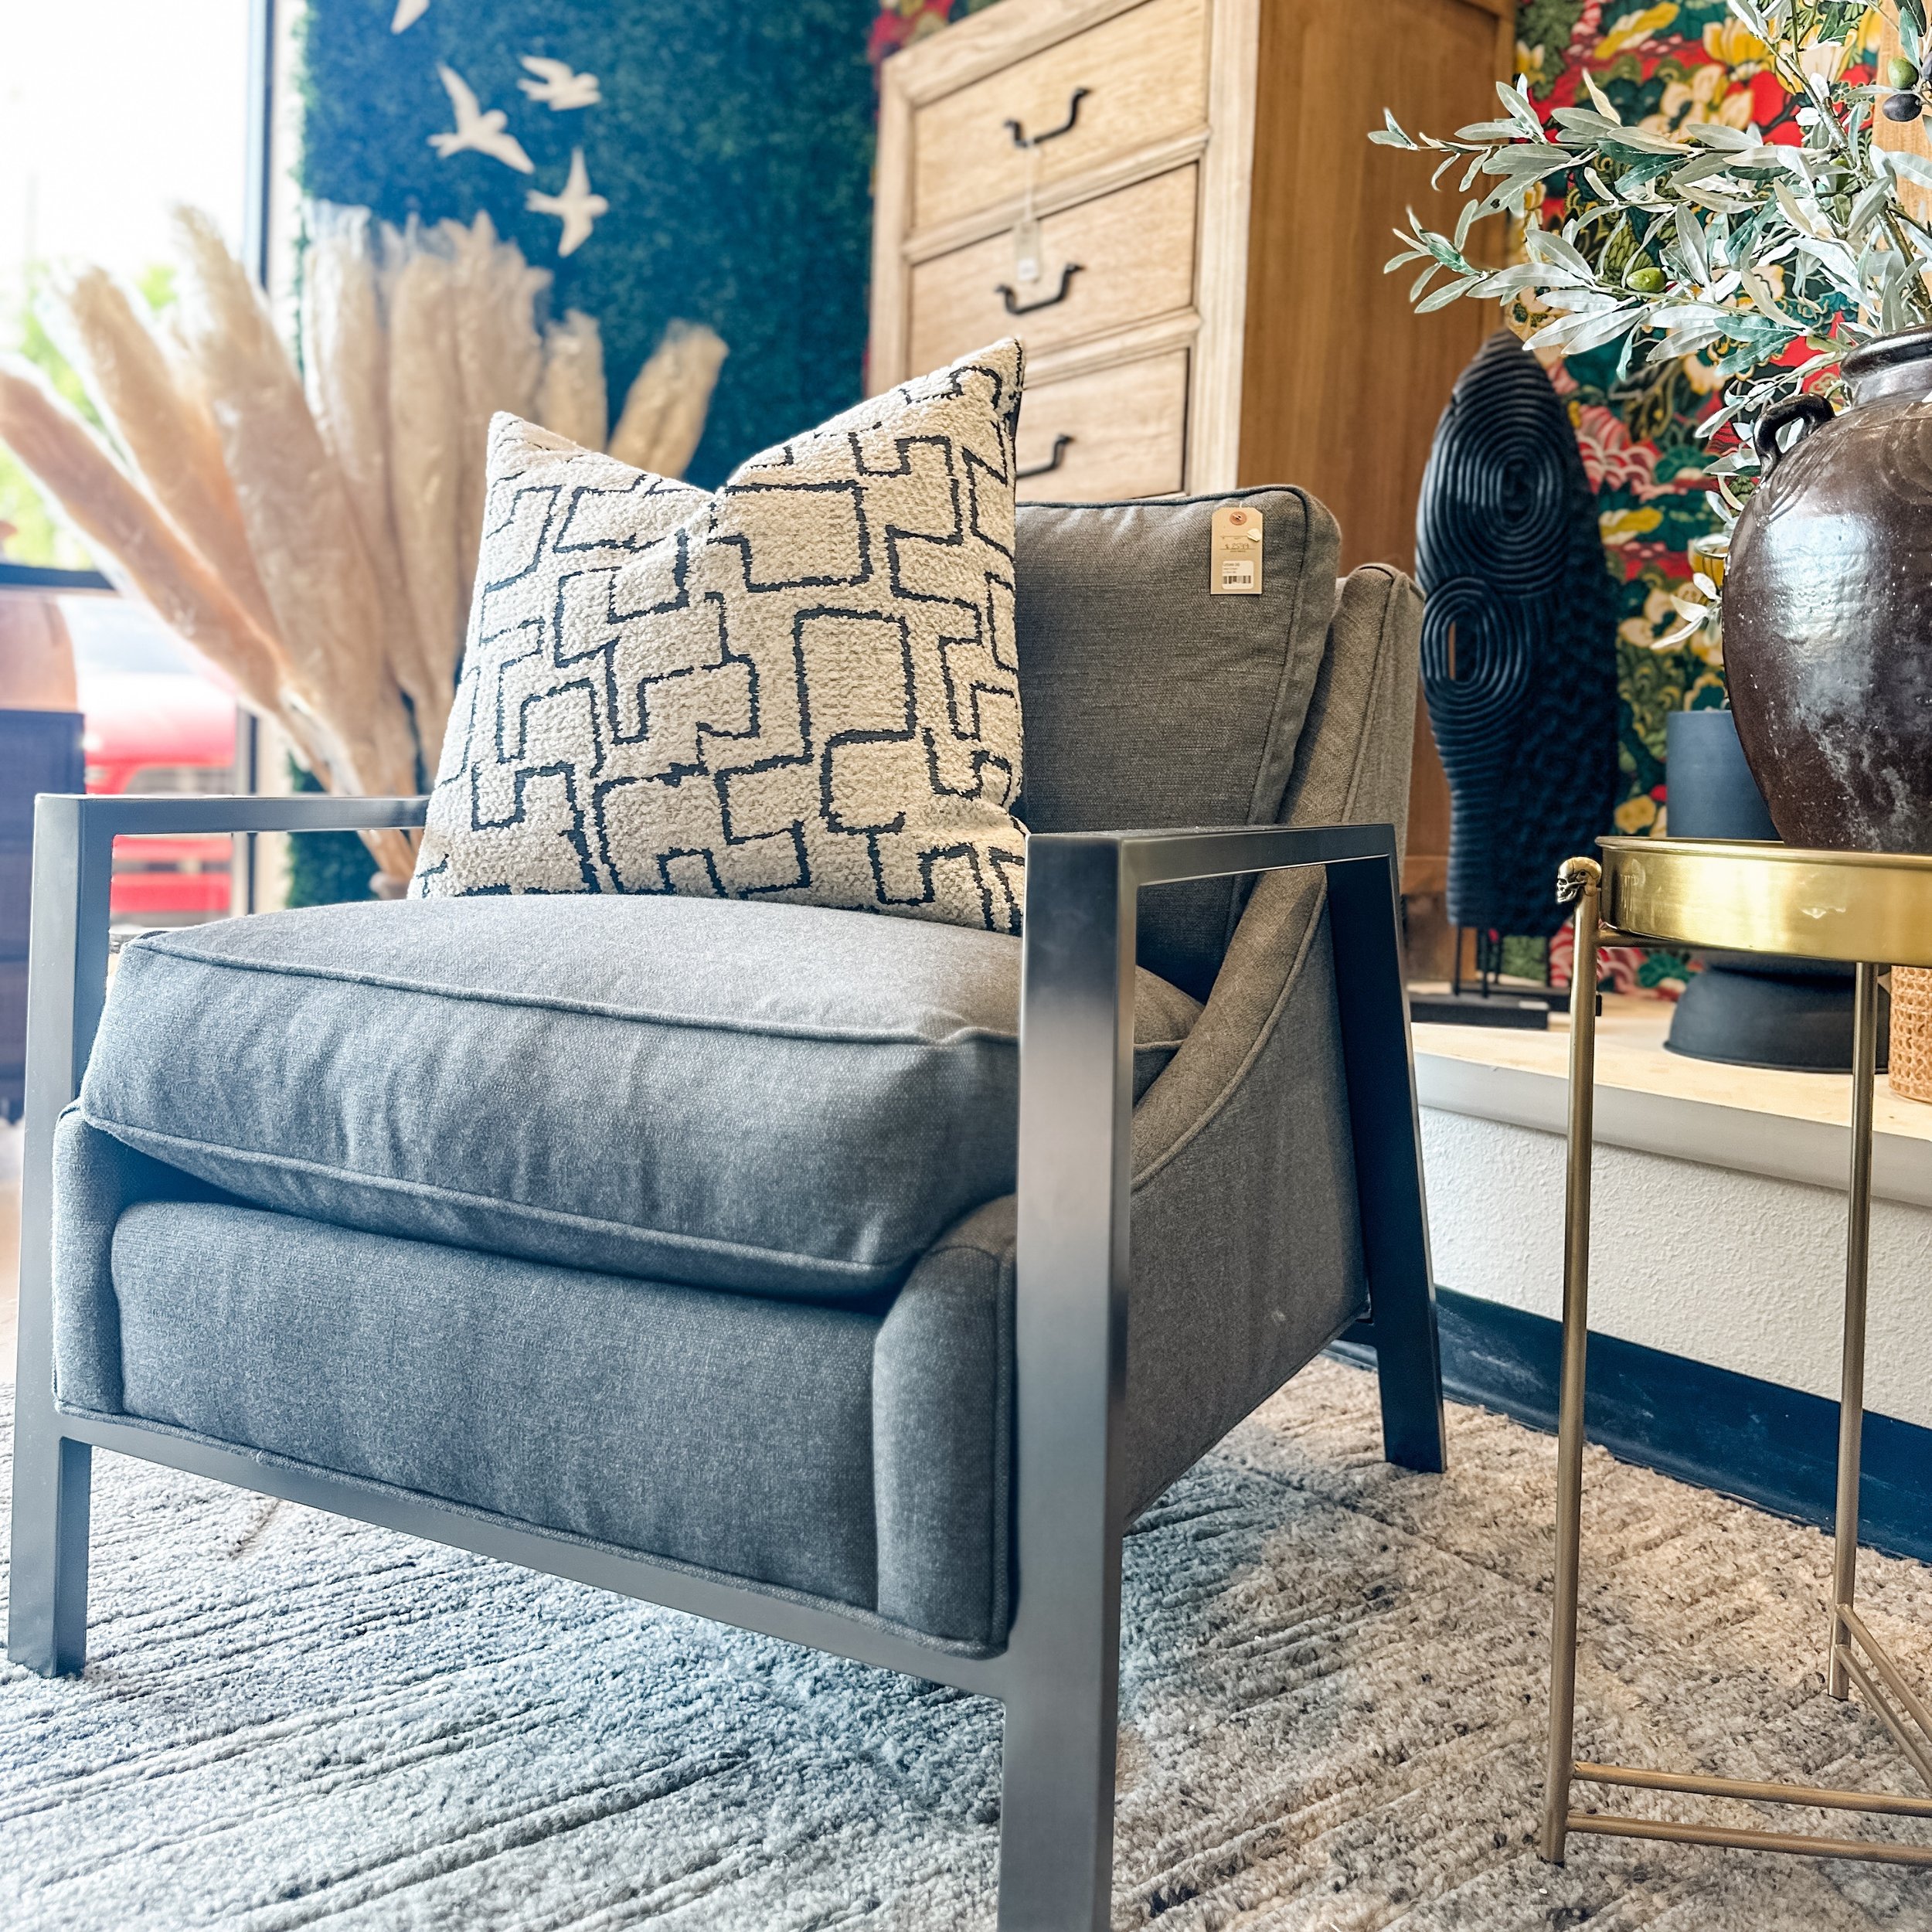 Planning a little weekend shopping trip? Come see us at the Showroom for 45% off all furniture 🙌🏼😍 snag our favorite pieces before they&rsquo;re gone 

Open Tues-Sat | 10am-5pm